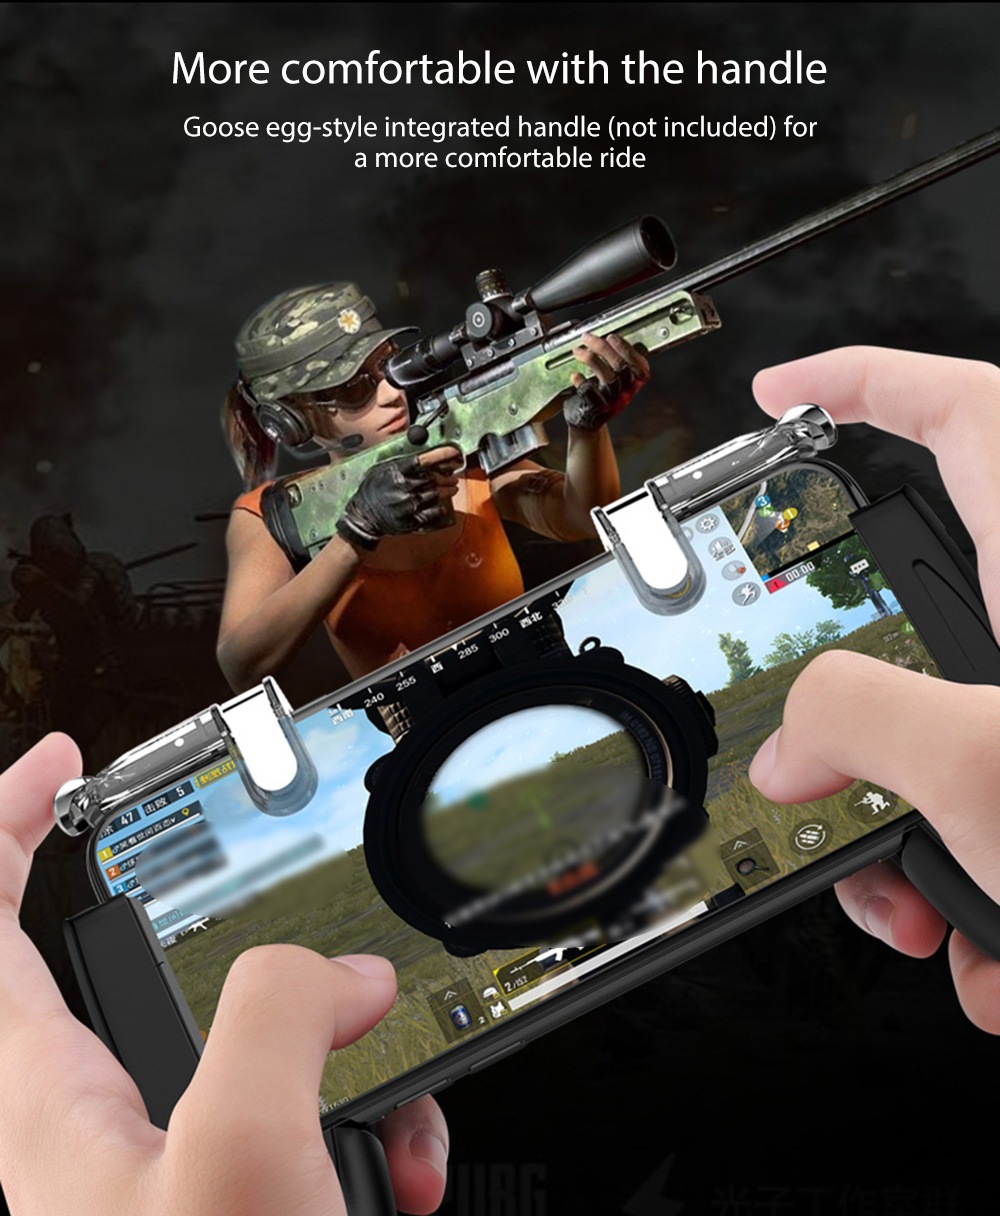 Pair of Mobile Phone Game Controllers Gamepad Shooter Buttons for Smartphone Fortnite Knives Out- Transparent